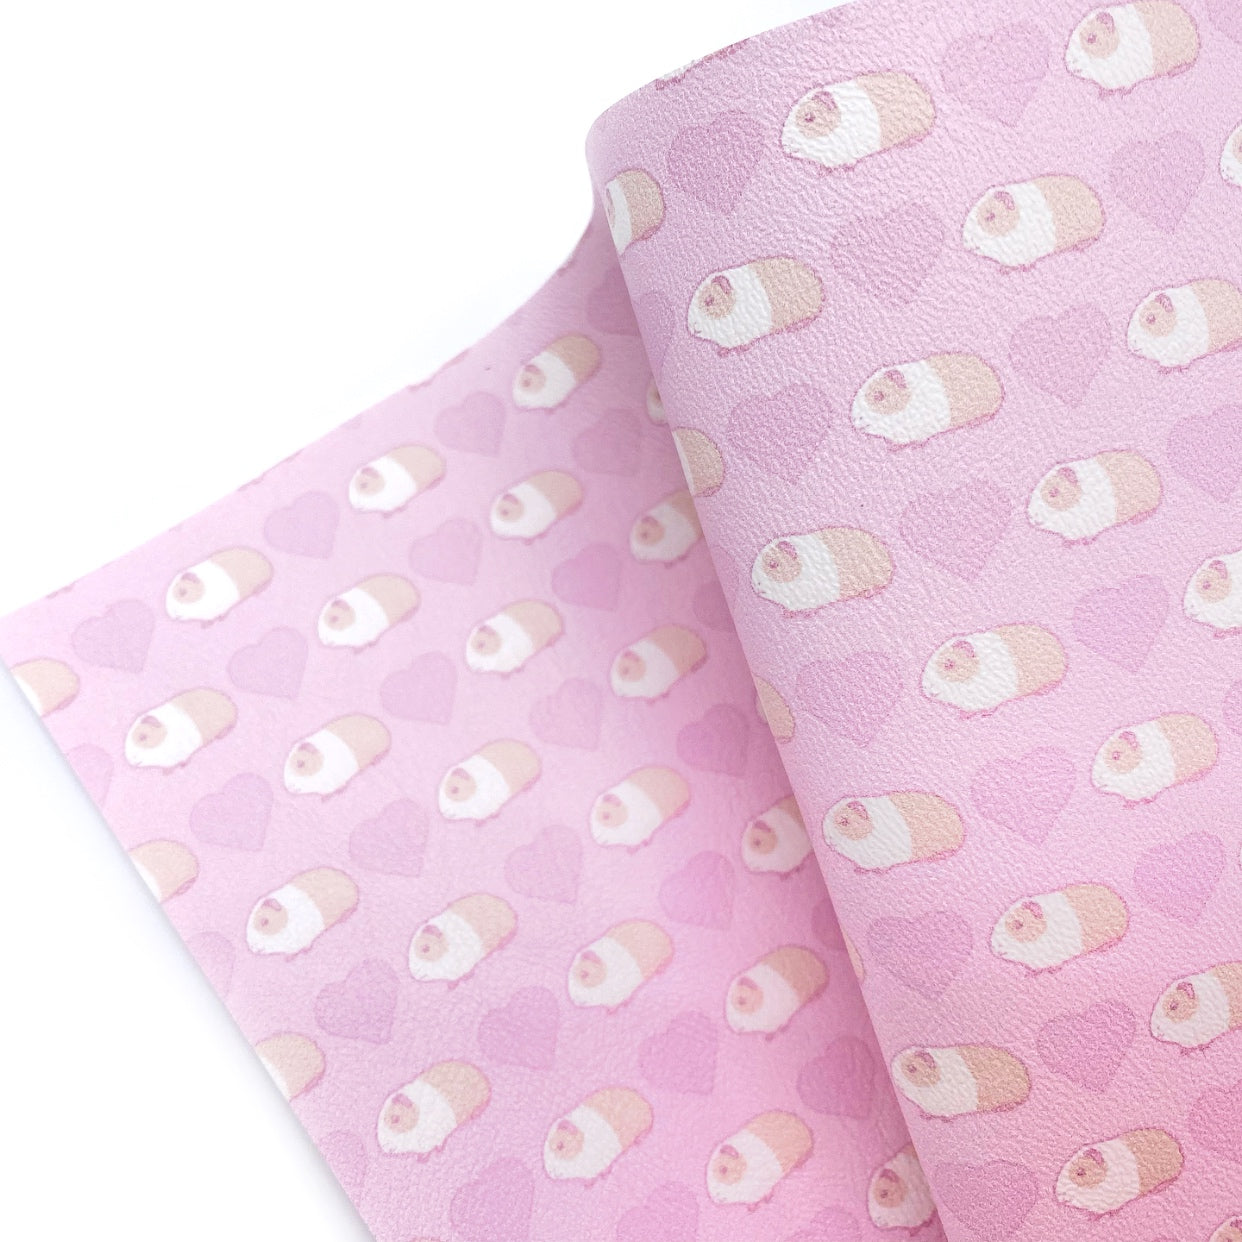 Pink Guinea Pigs Premium Faux Leather Fabric Sheets